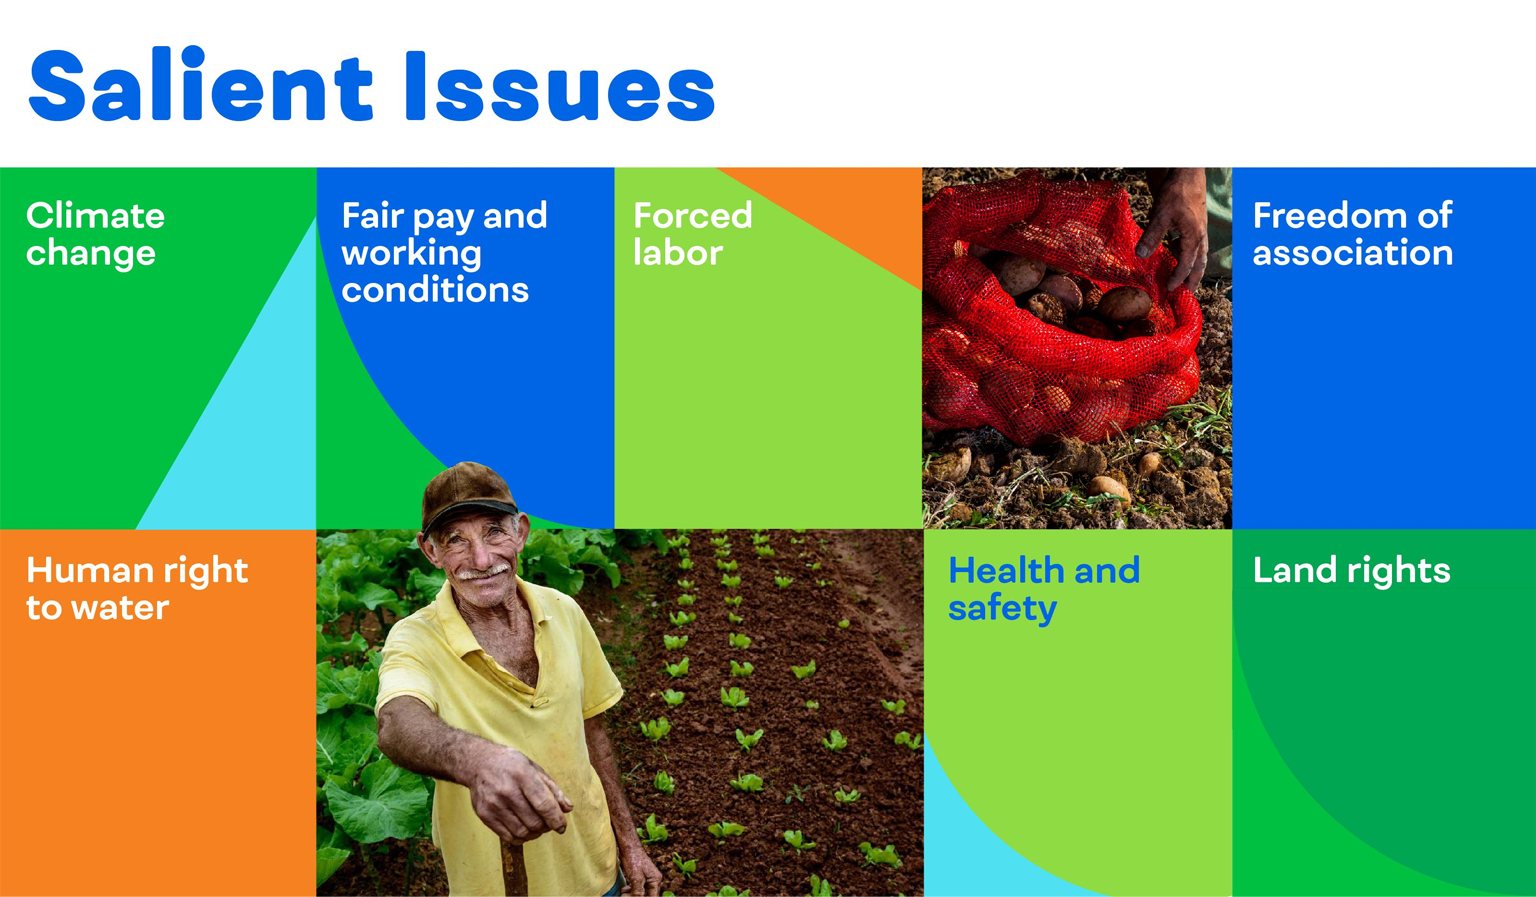 Salient Issues: Climate change; Fair pay and working conditions; Forced labor; Freedom of association; Human right to water; Health and safety; Land rights.